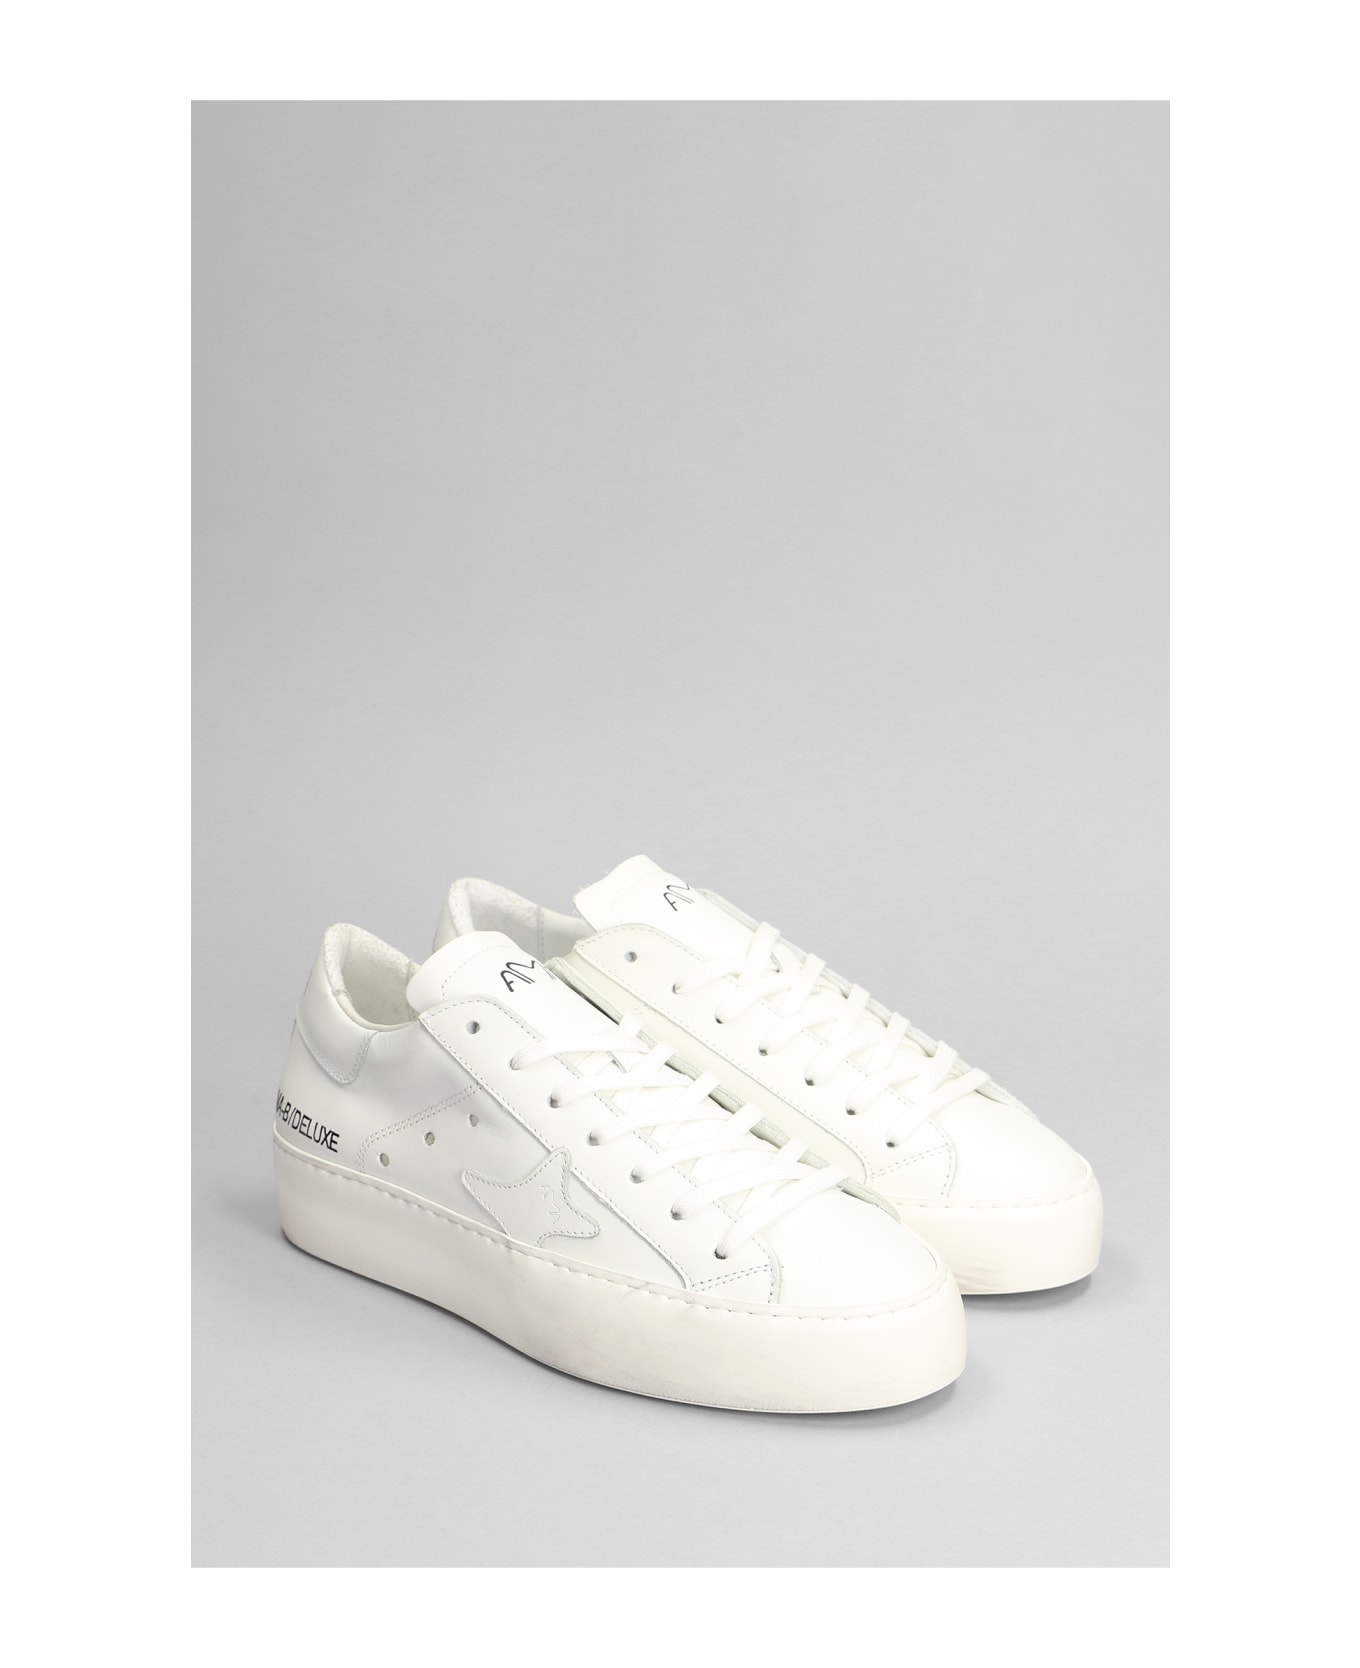 AMA-BRAND Sneakers In White Leather - white ウェッジシューズ